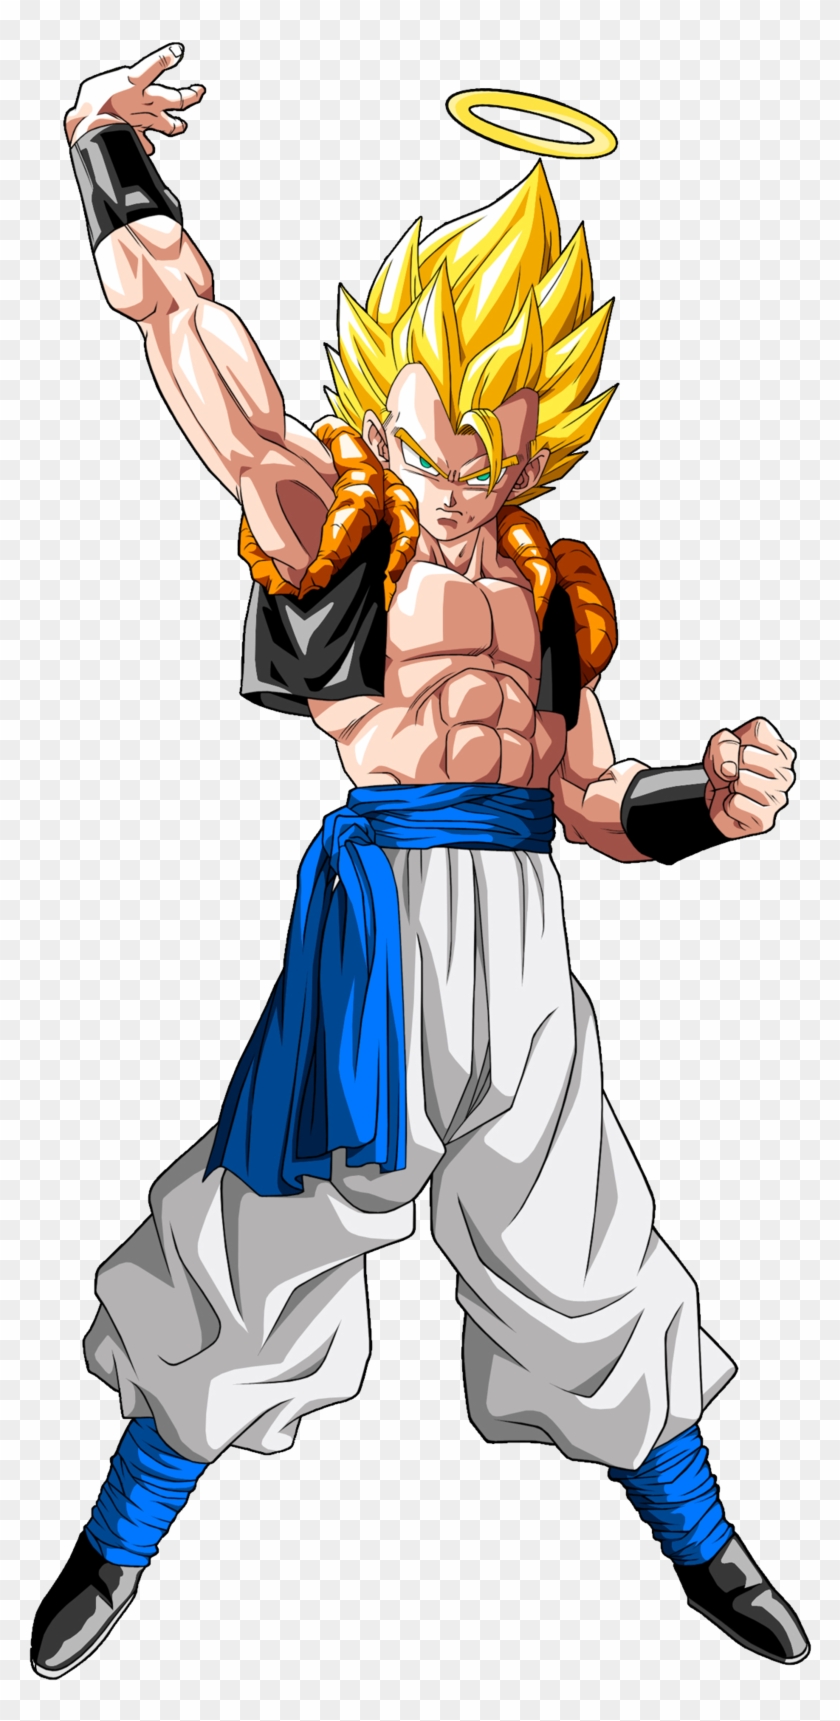 Dragon Ball S Fusion Dragon Ball Z Hd Png Download 900x1784 Pngfind